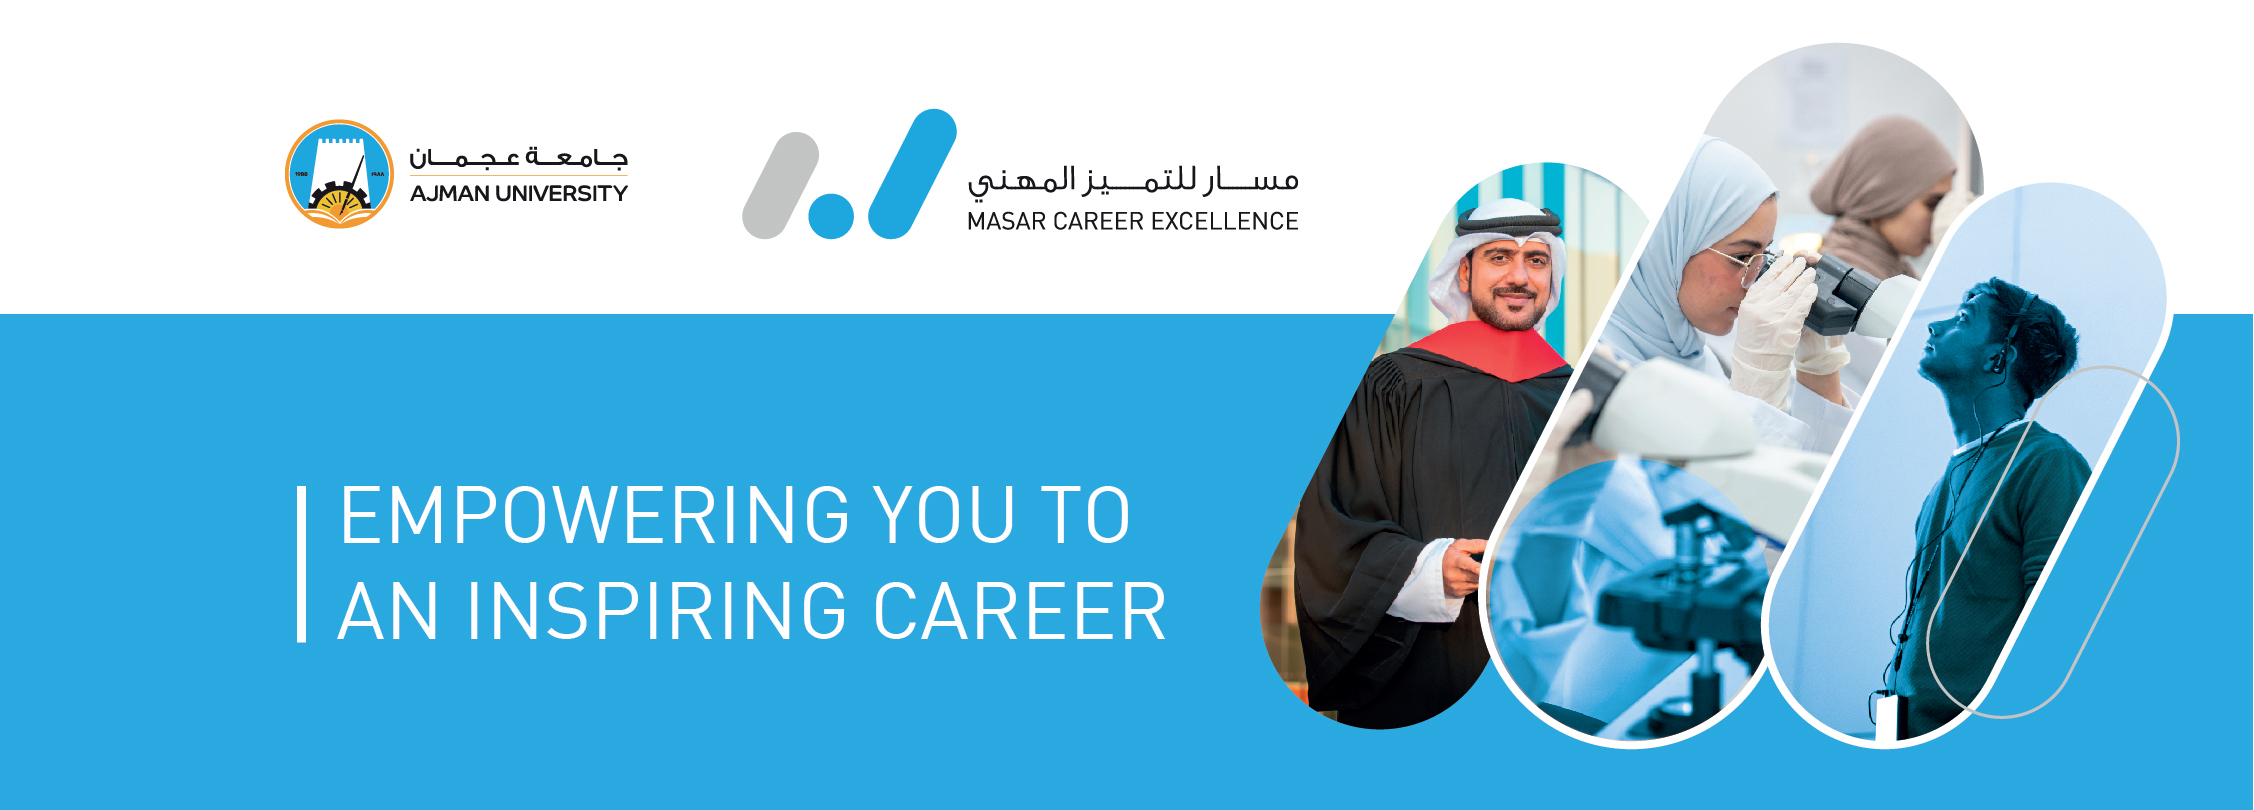 Masar Career Excellence